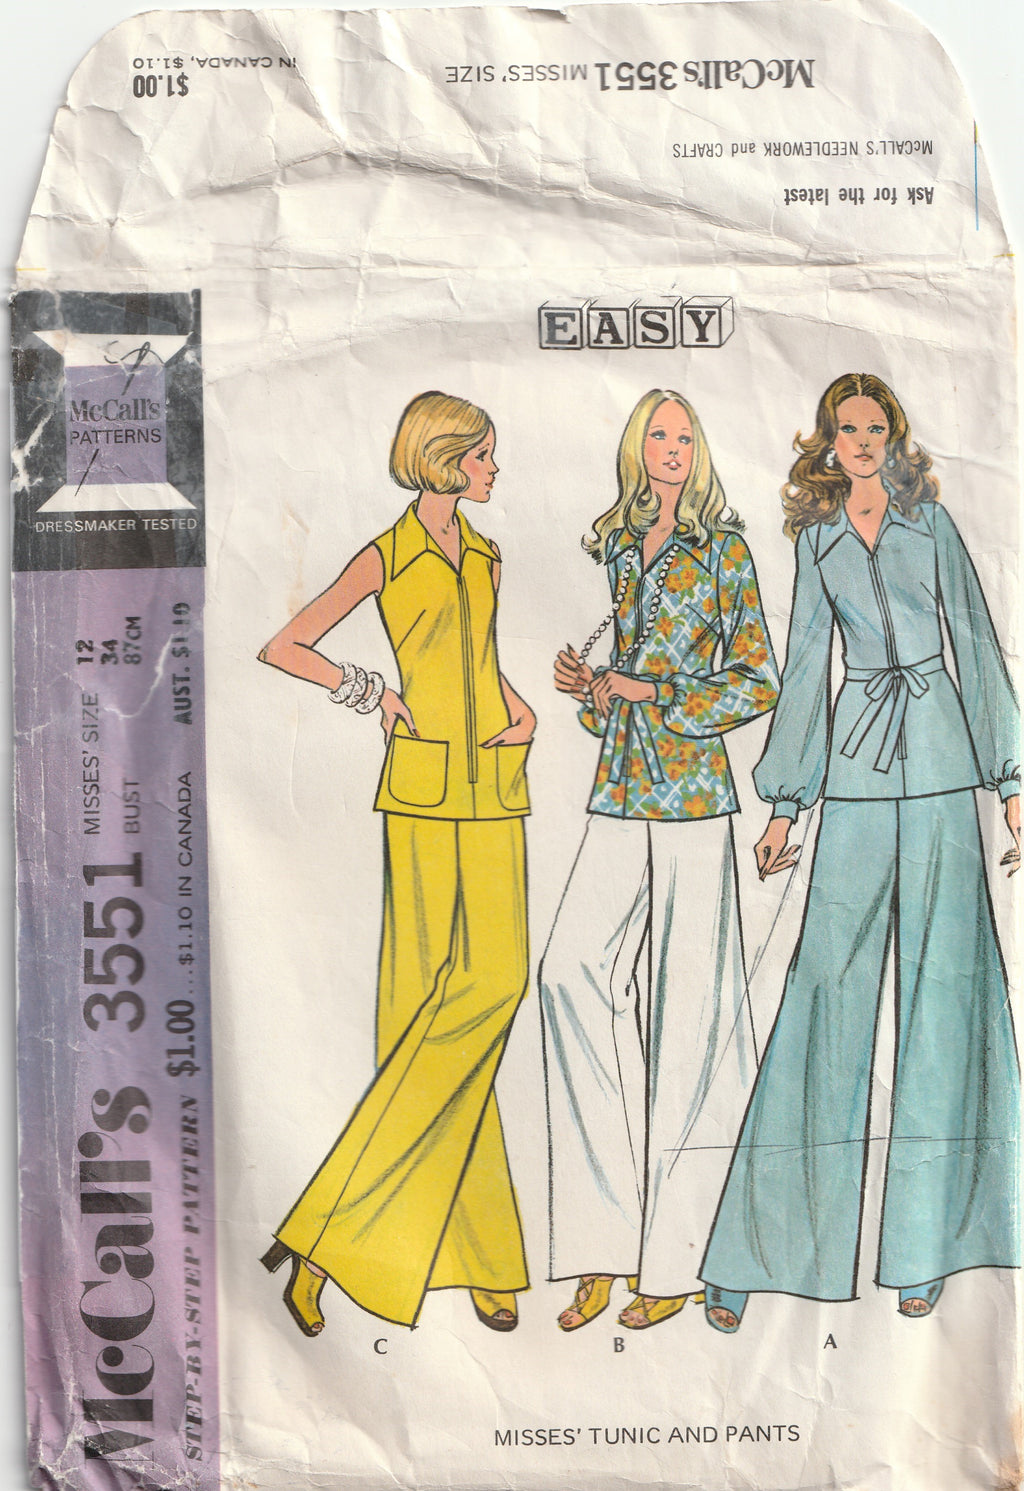 1970s vintage sewing pattern bell bottoms and tunic top mccall's 3551 1973